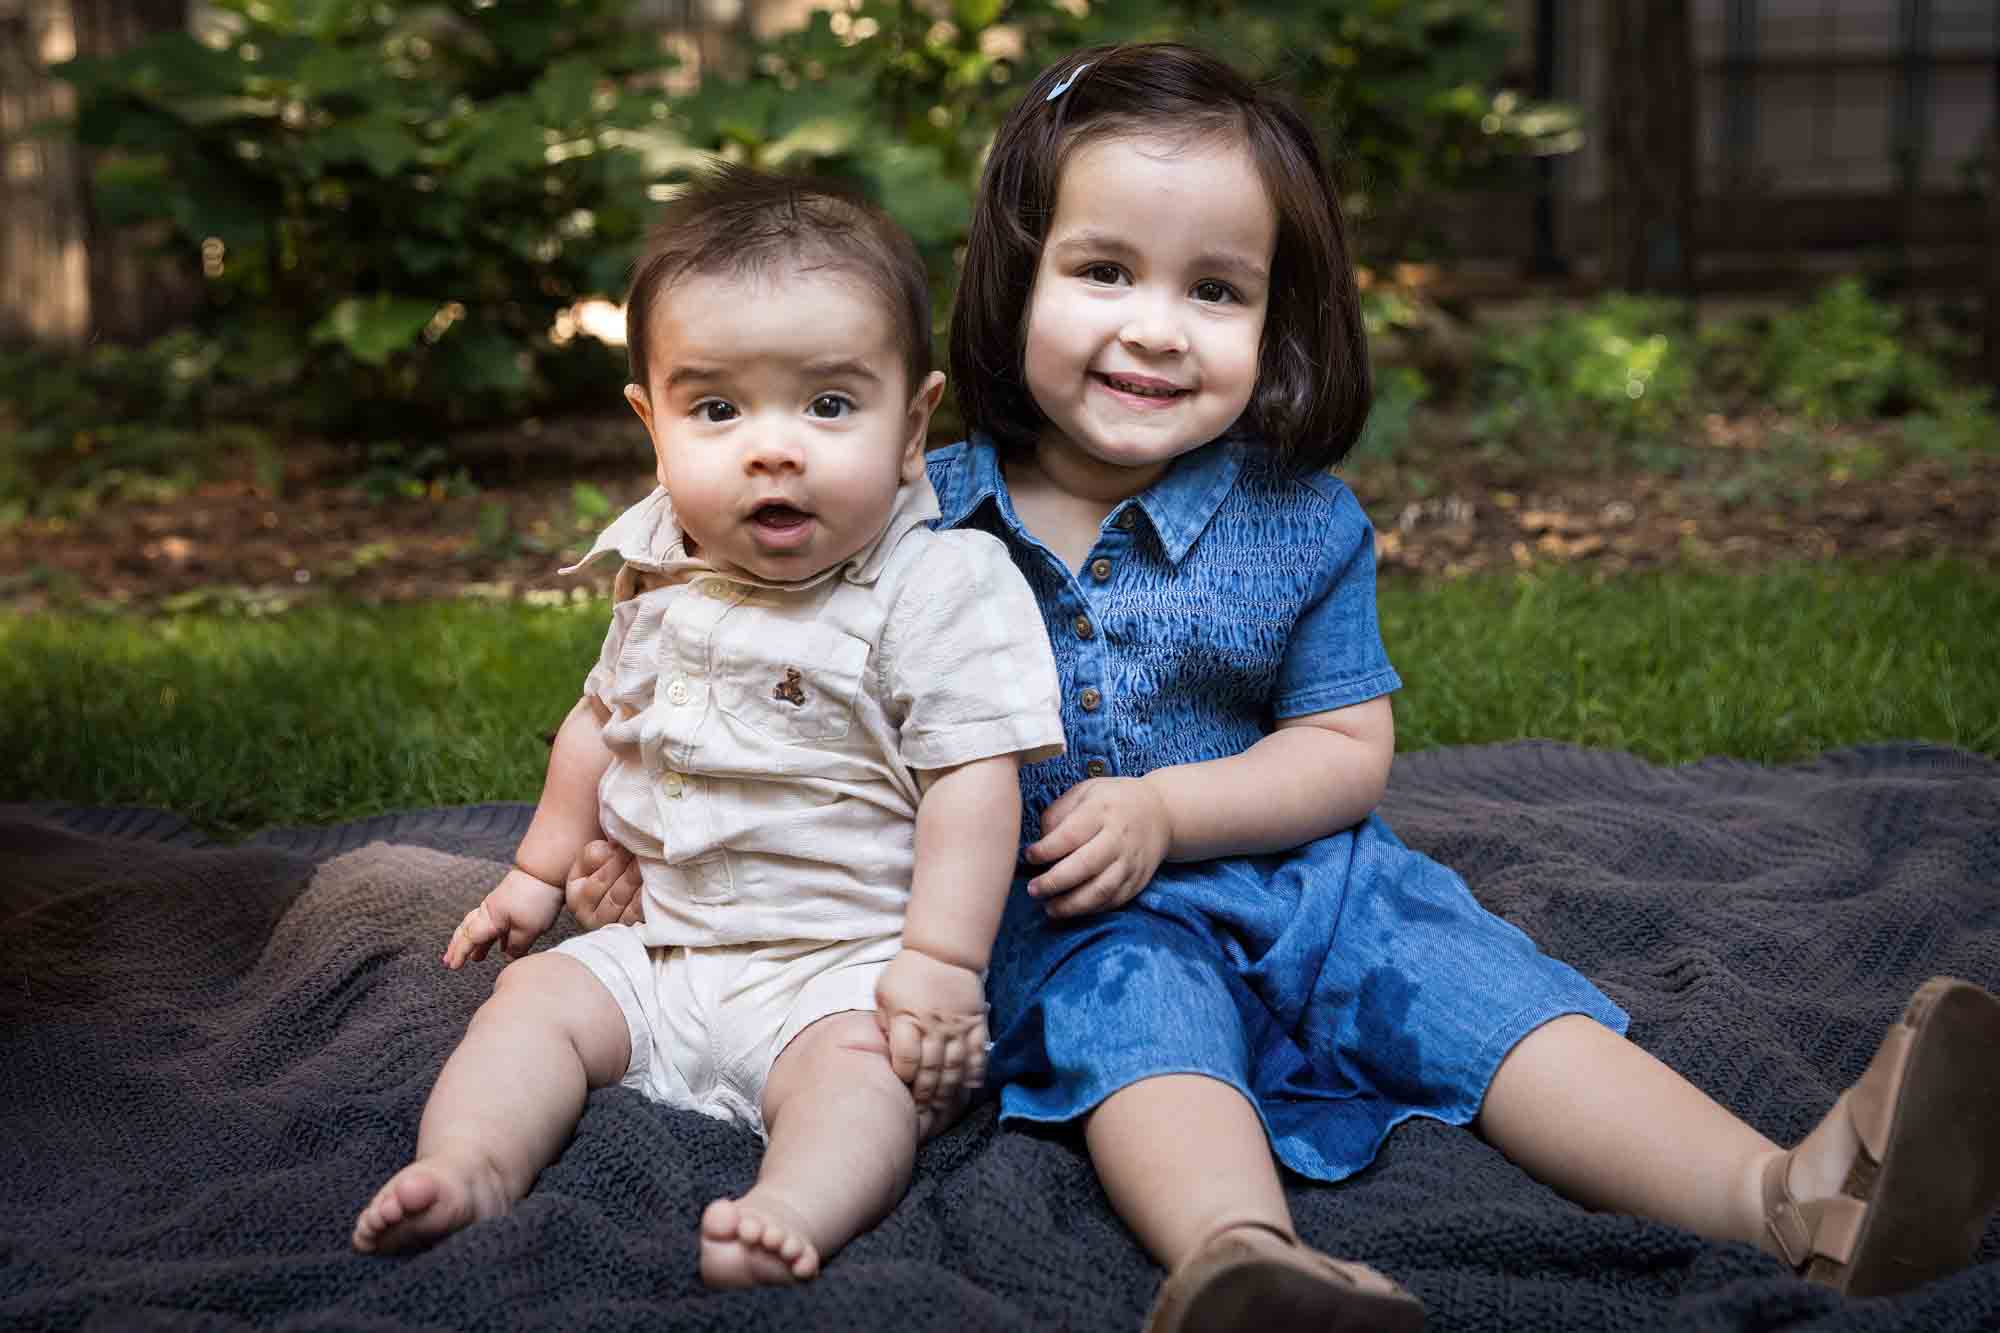 Little girl in blue dress holding baby brother on gray blanket during a Brooklyn Commons family portrait session